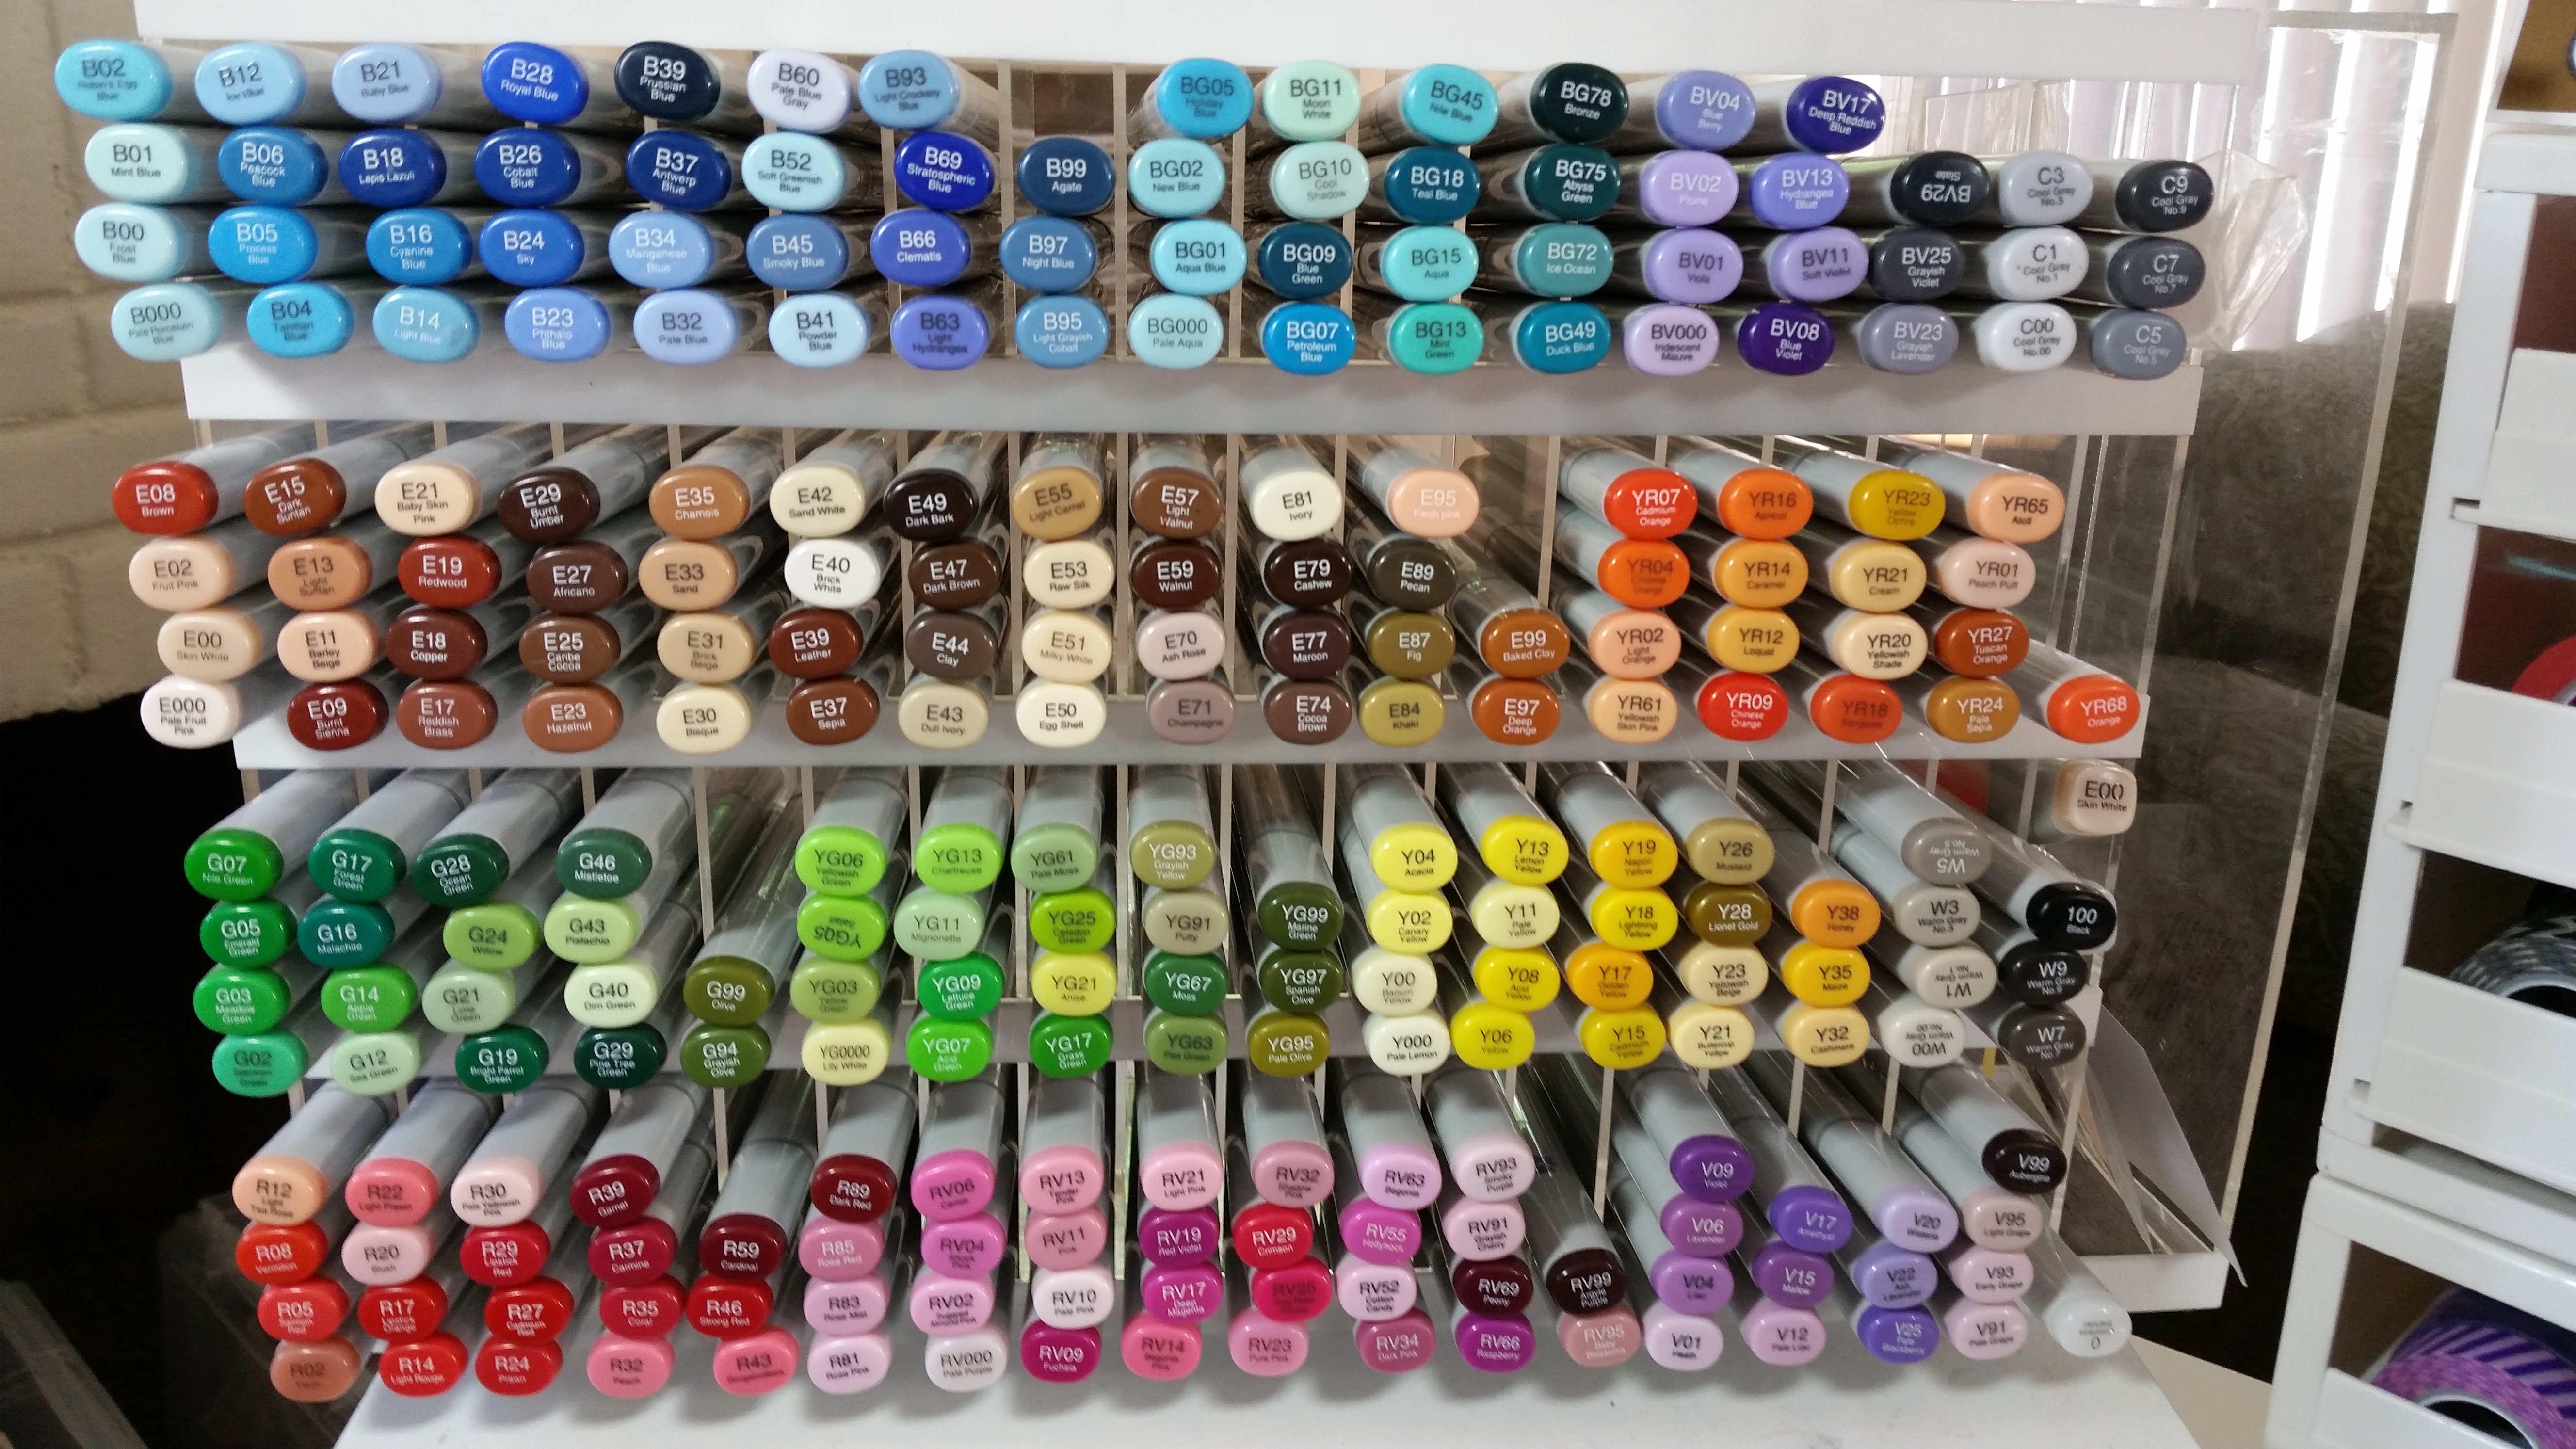 6. Copic Marker Storage - Kat's Adventures in Paper Crafting